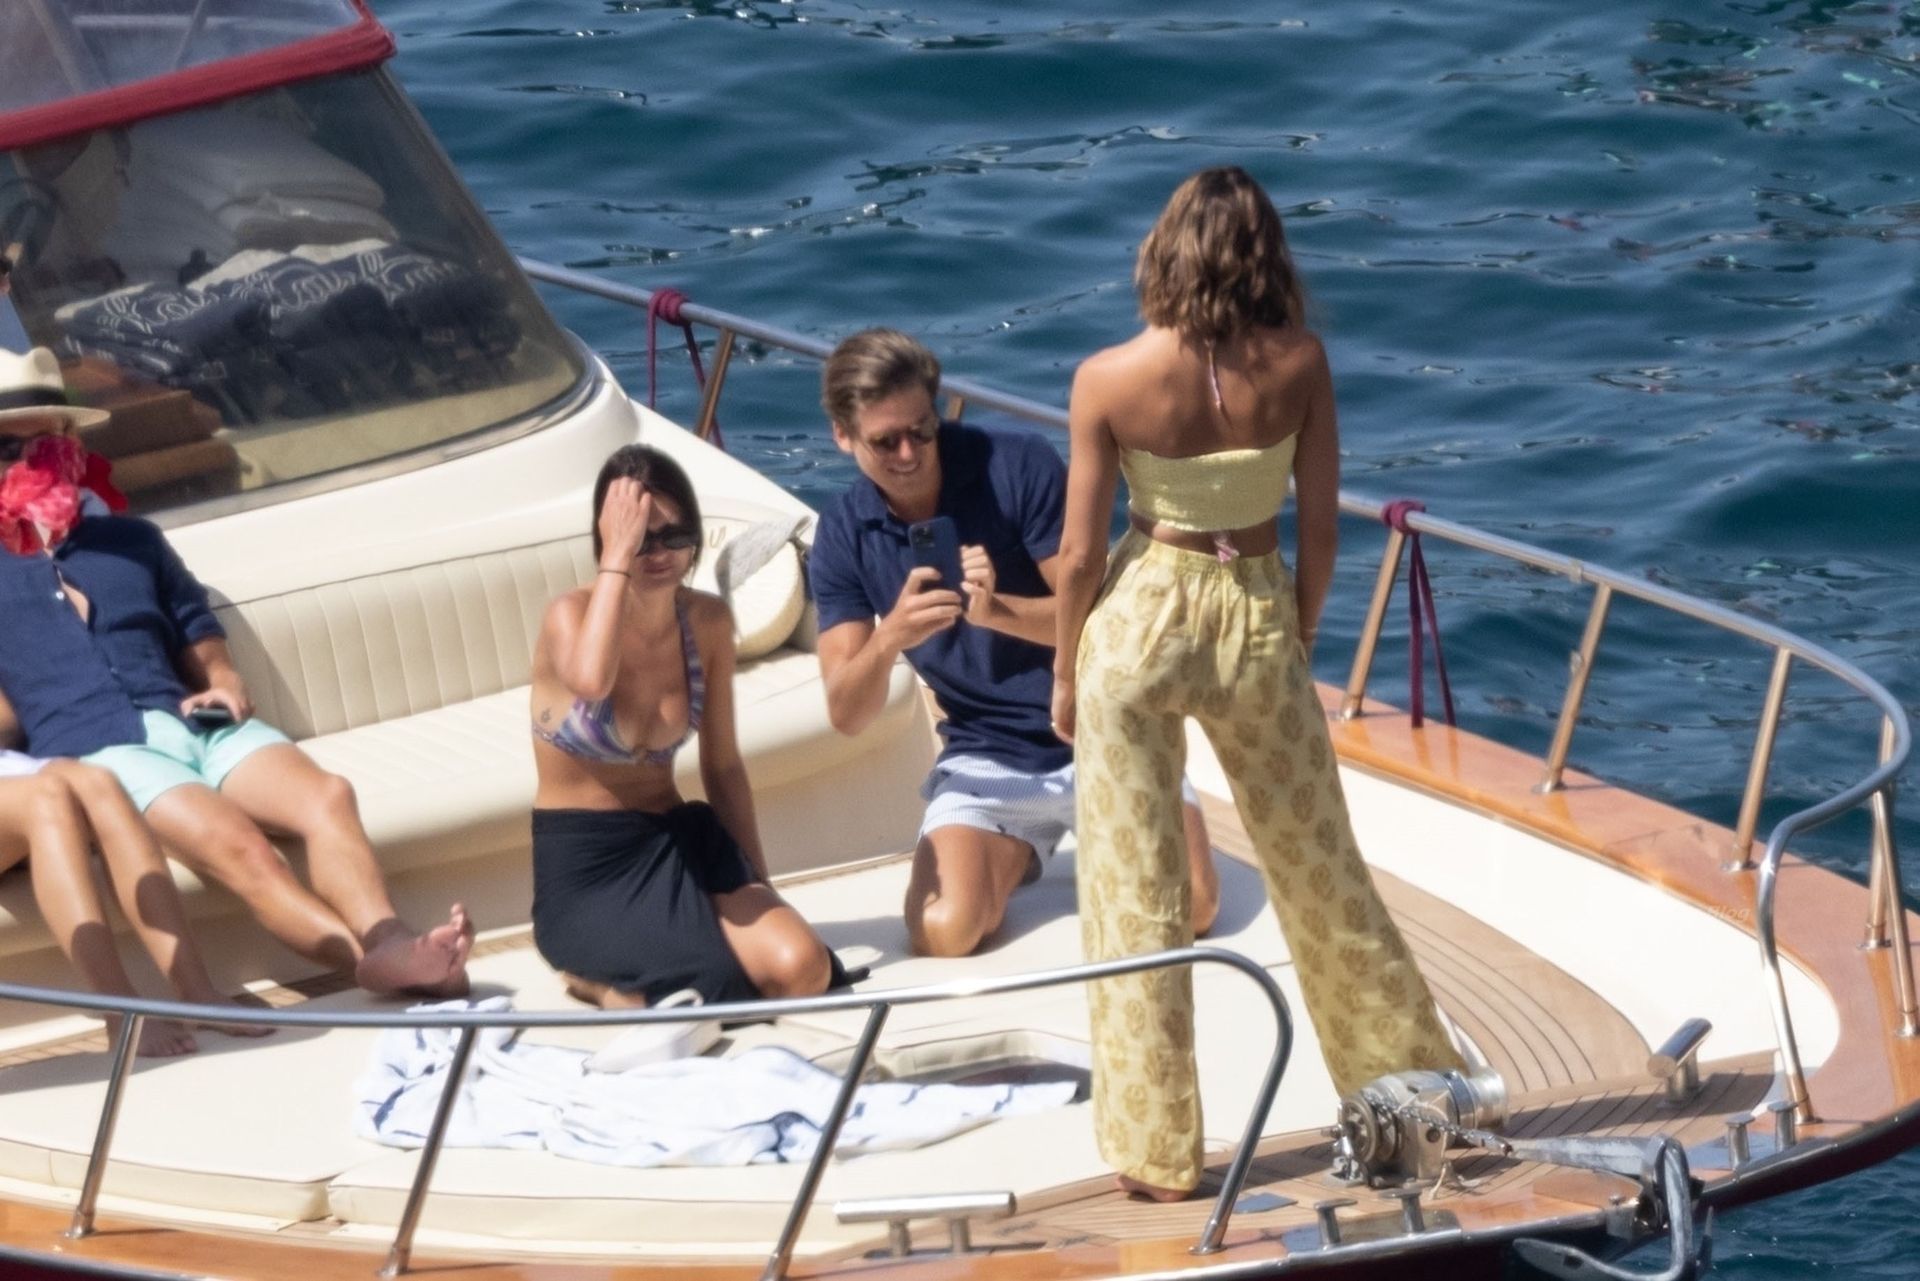 Taylor Hill Enjoys Her Italian Vacation with Daniel Fryer out in Positano (36 Photos)